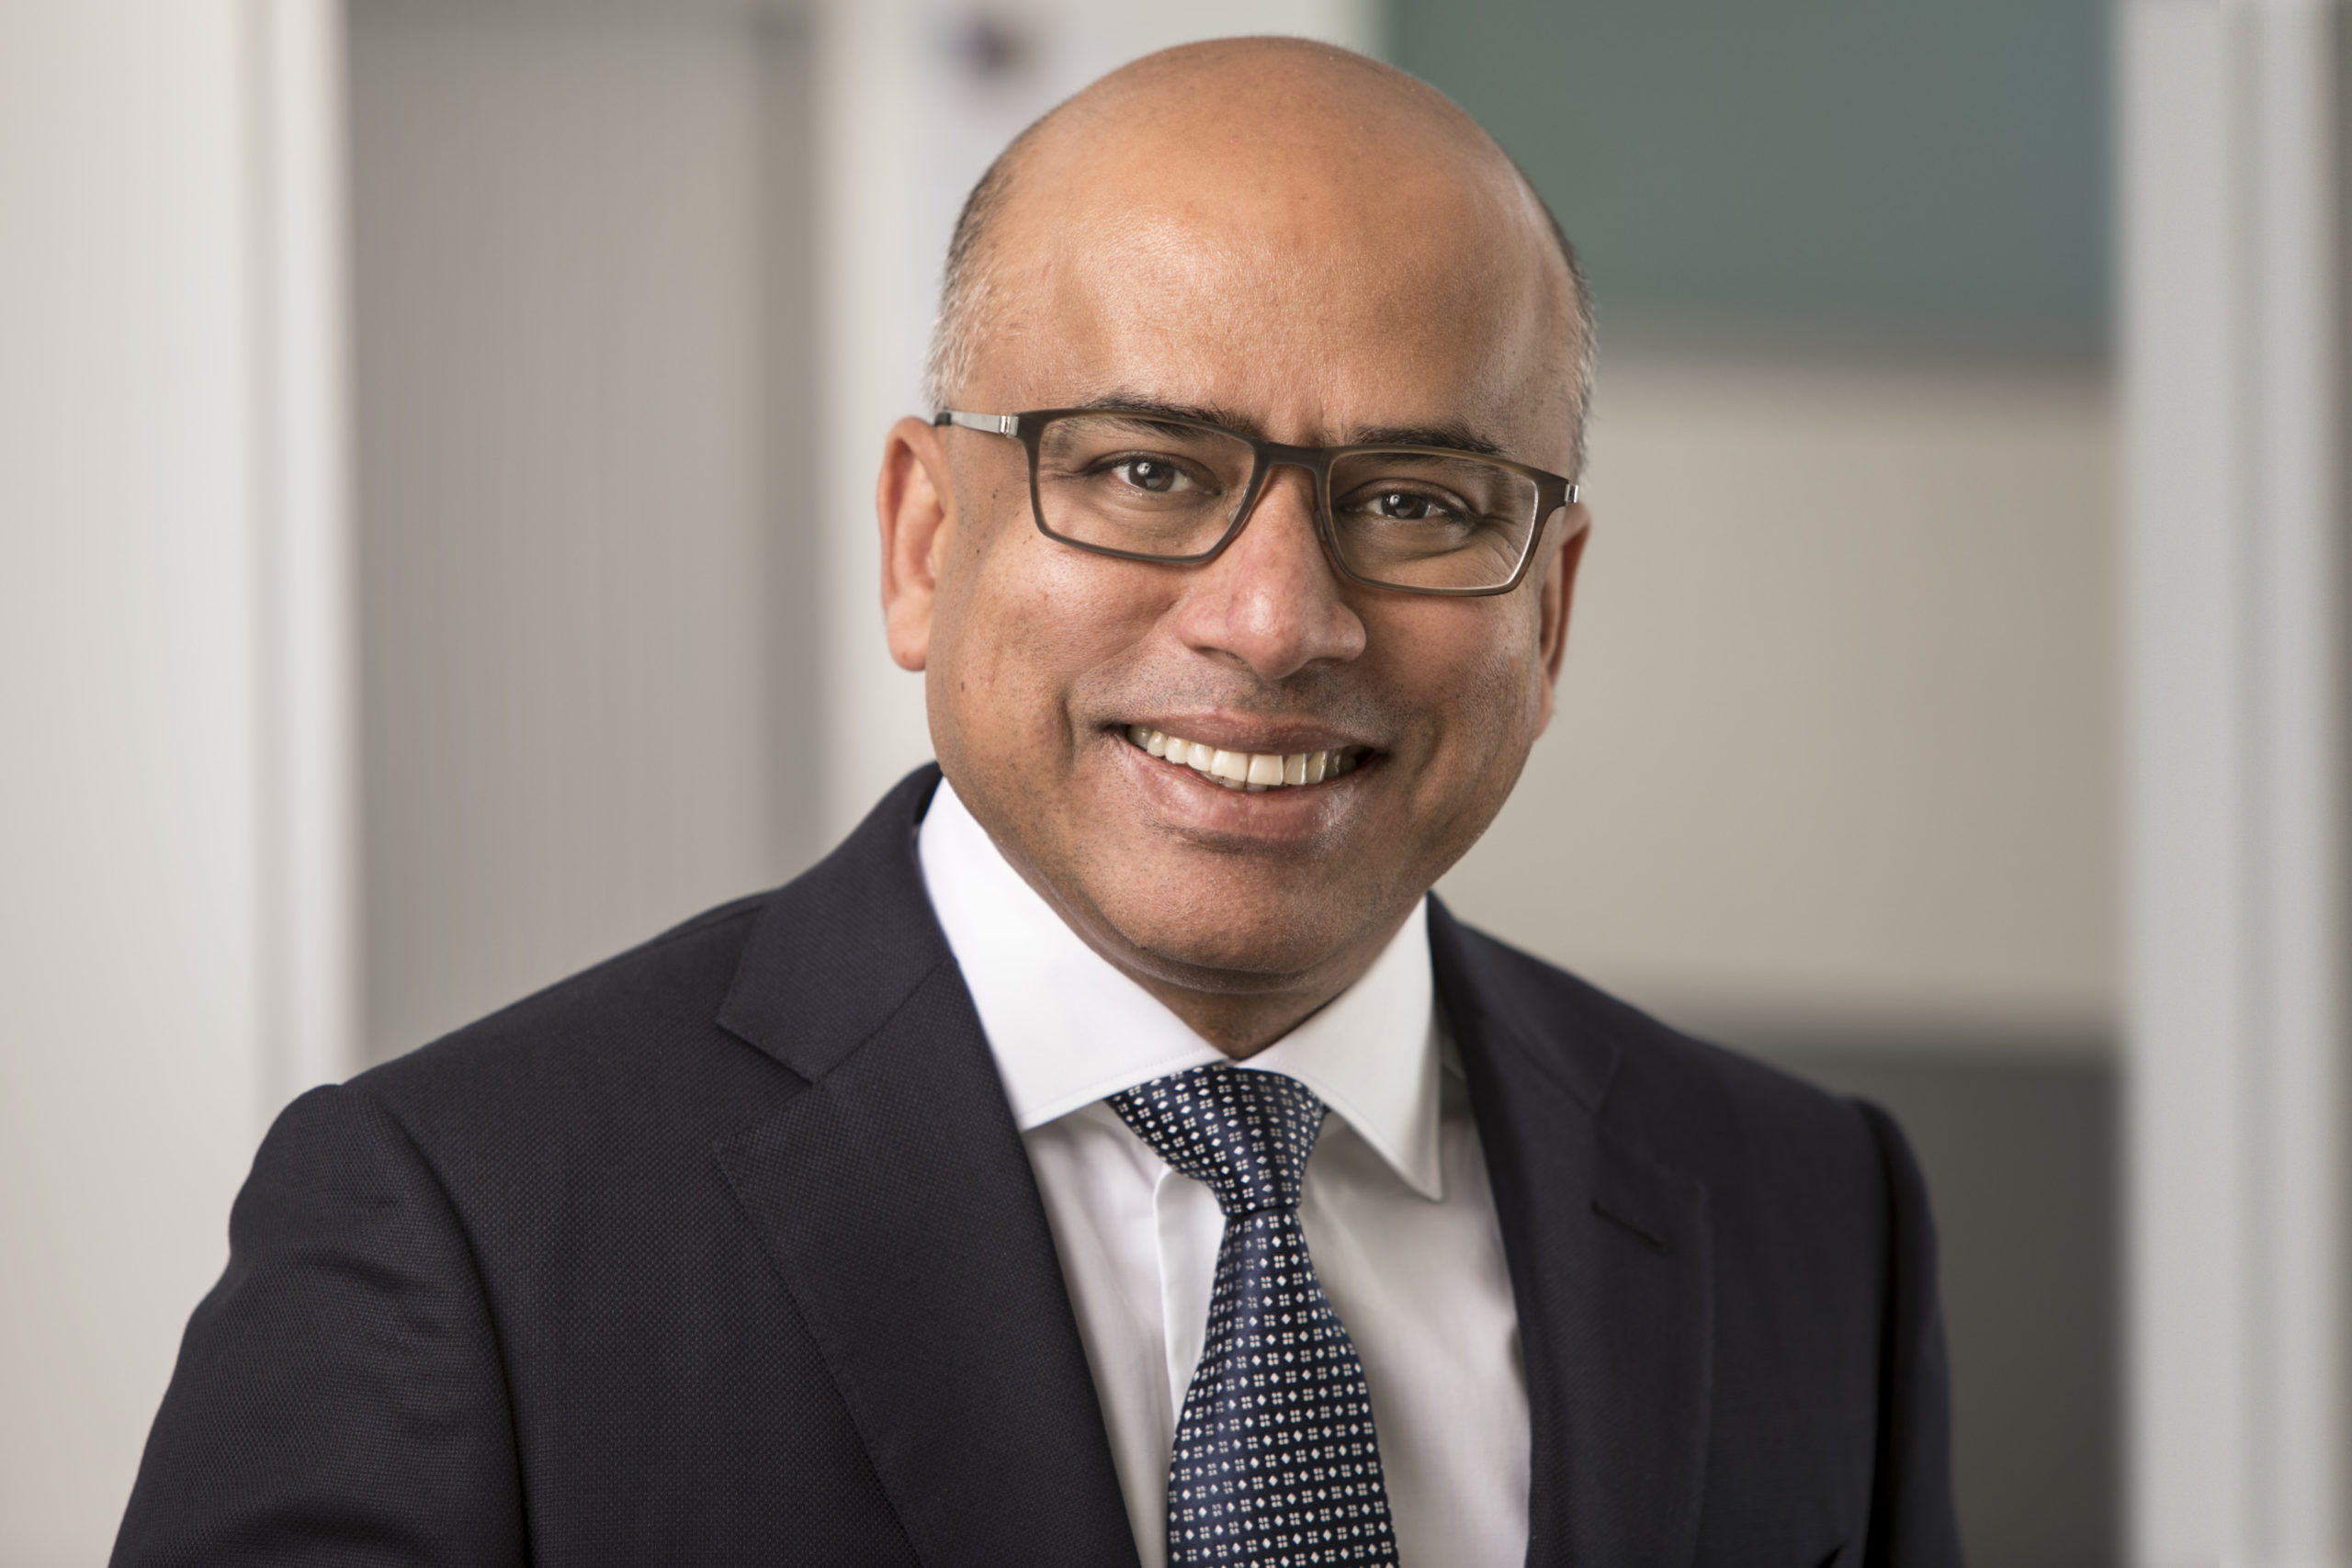 A message from Sanjeev Gupta, Executive Chairman